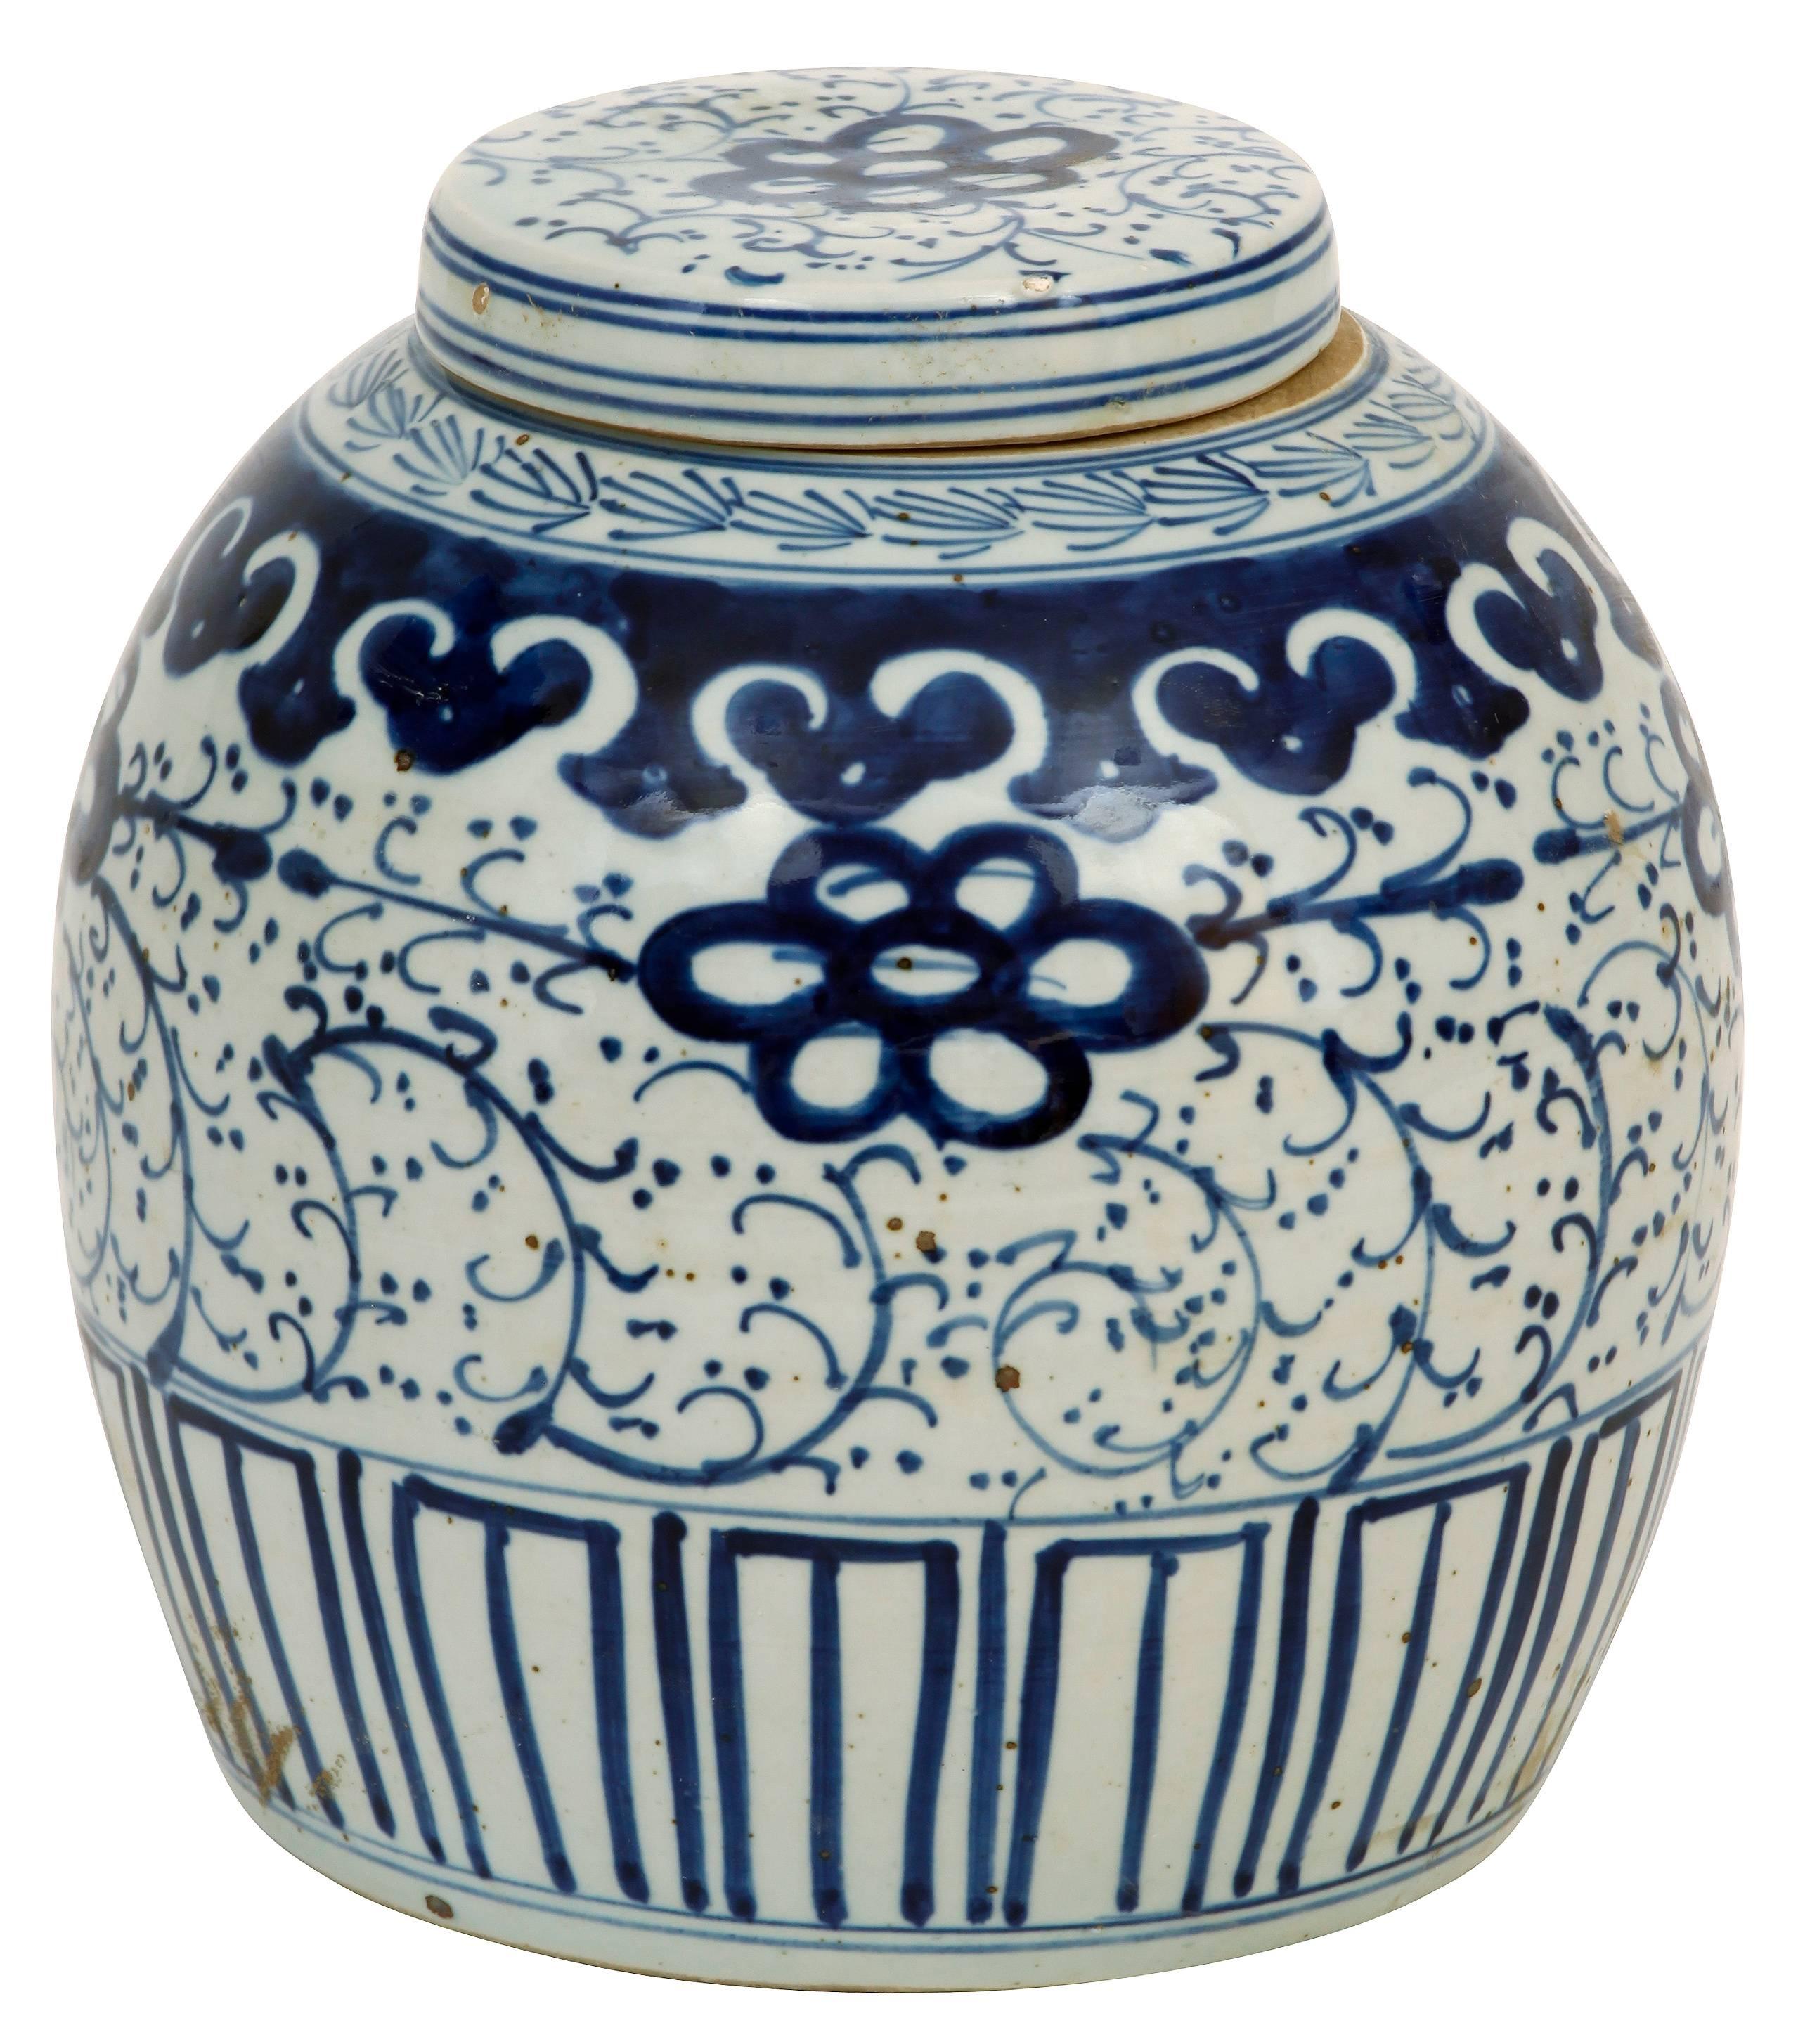 Blue and white is a Classic that will never go out of style. This pair of Chinese export jars with a lid have beautiful glazing and wonderful detail--perfect on a mantel, console or a centerpiece.